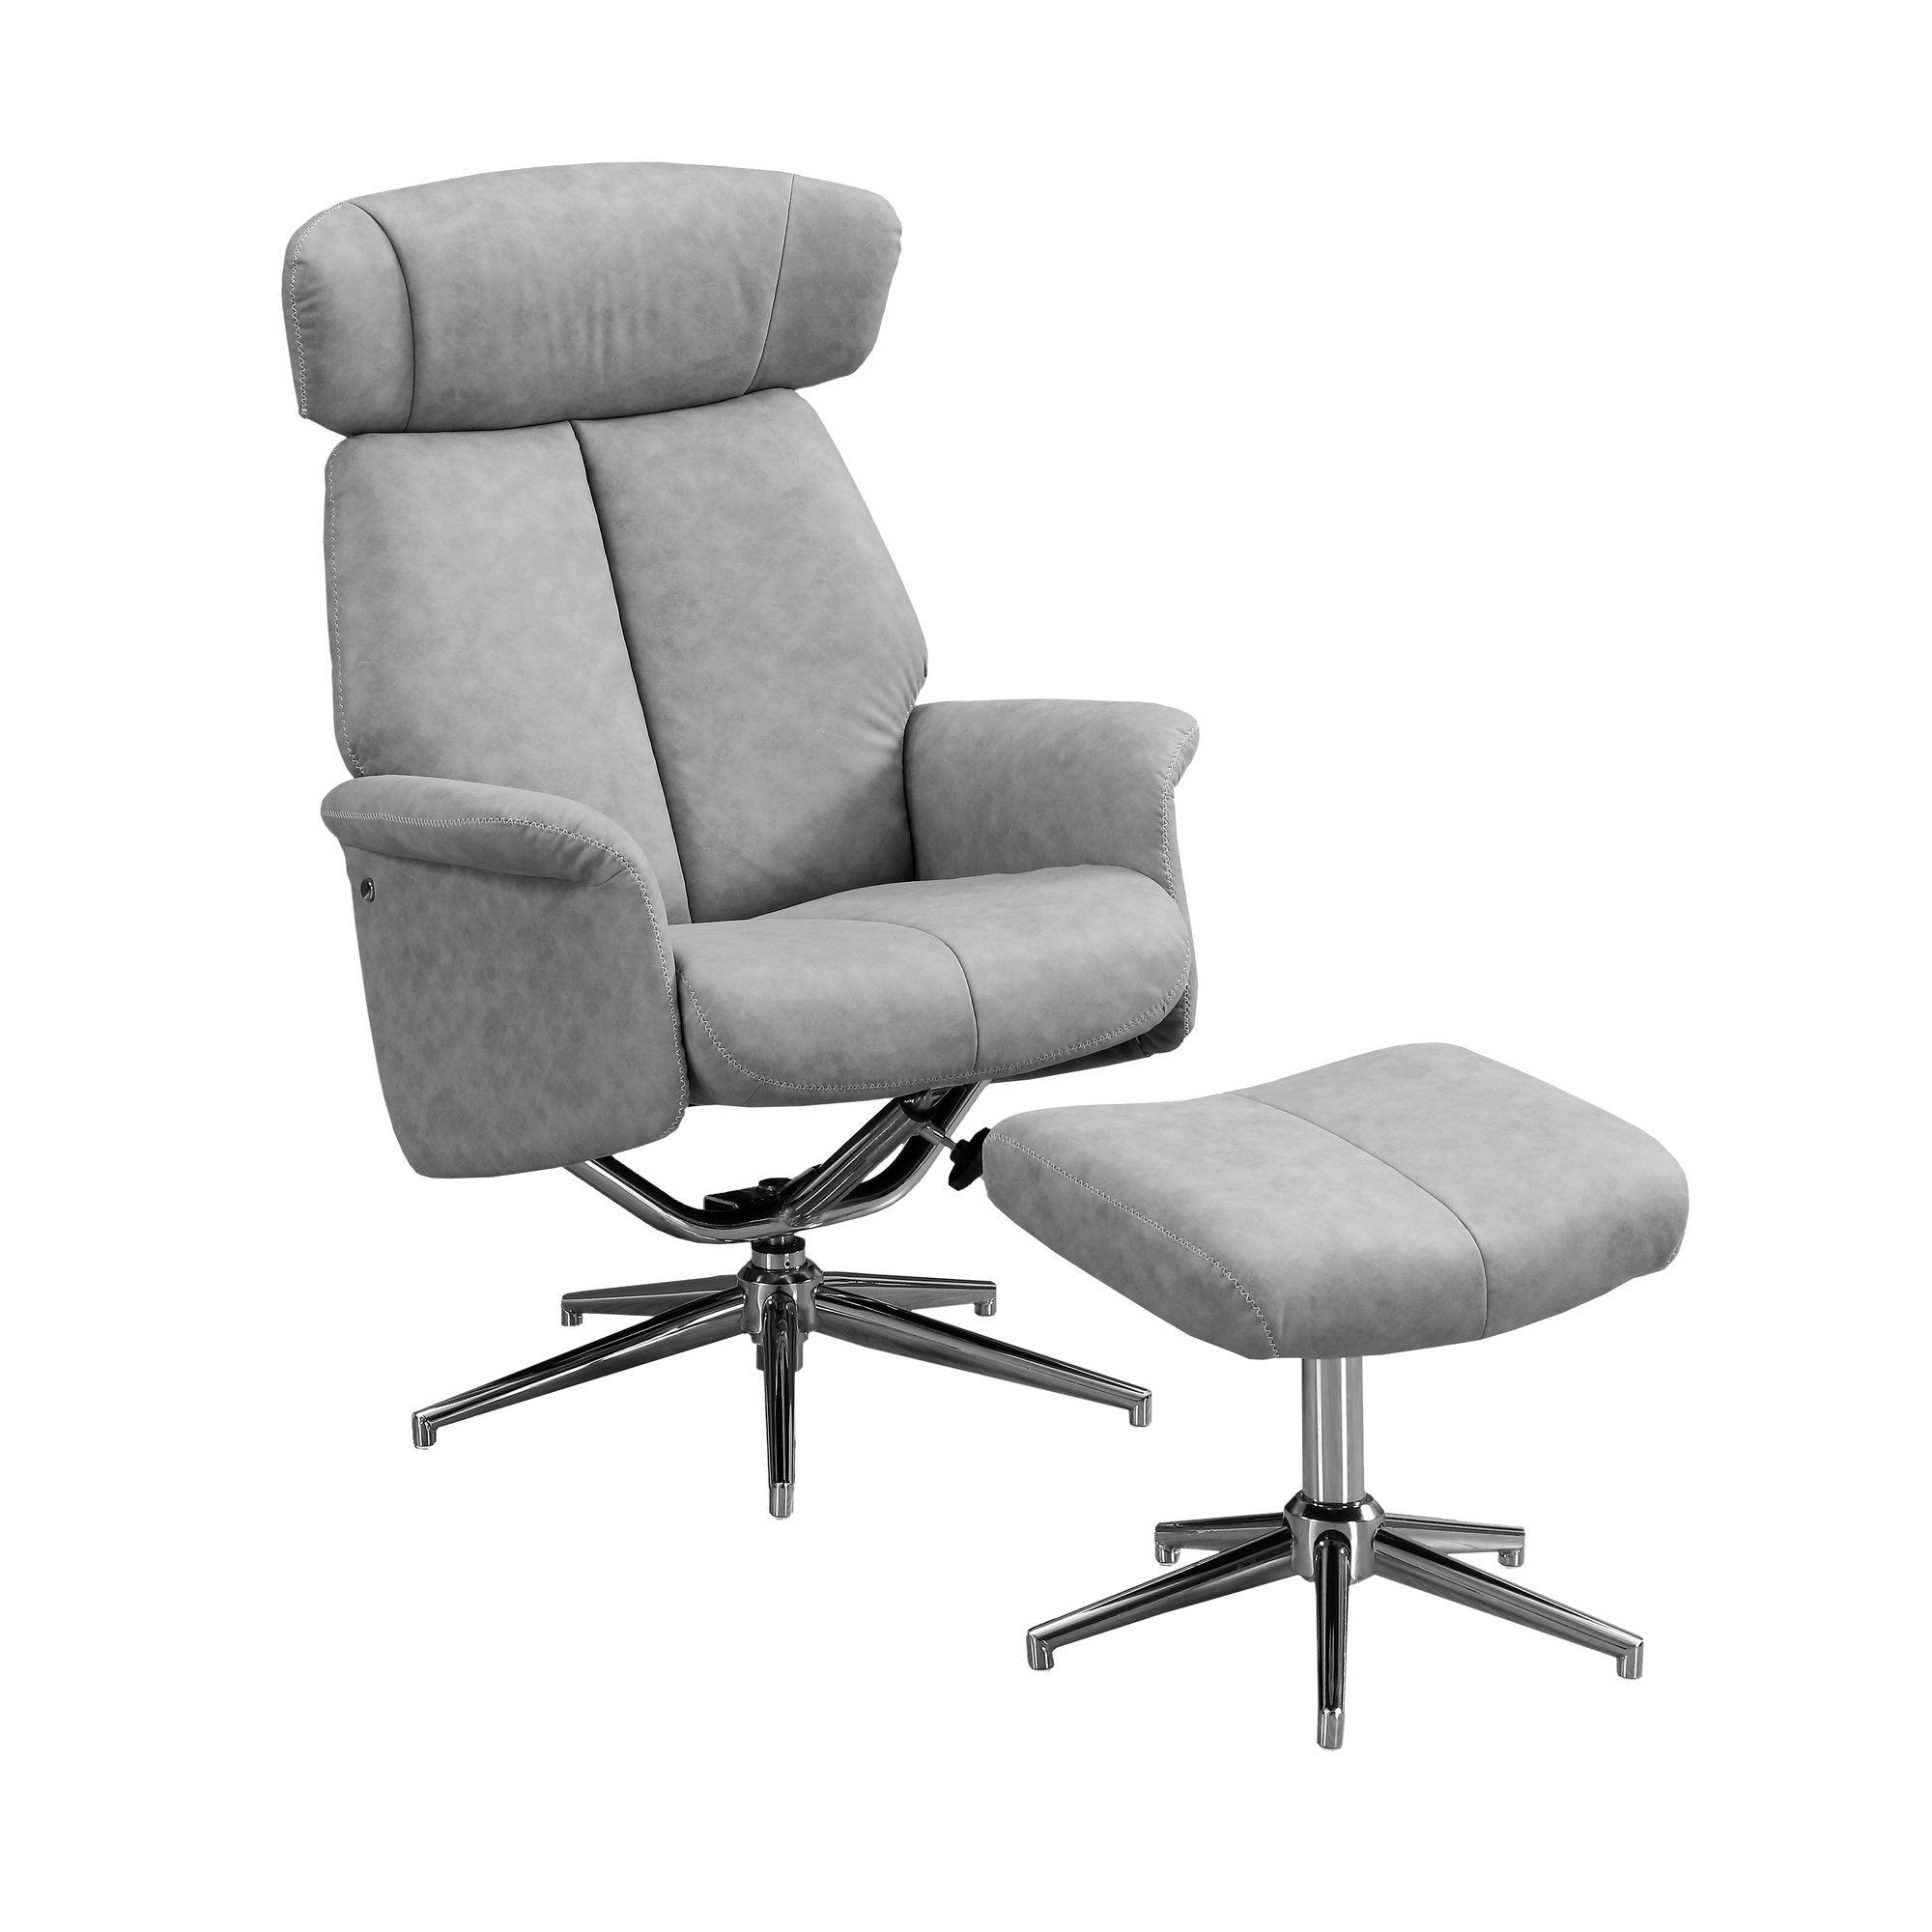 Gray-Fabric-Tufted-Seat-Swivel-Adjustable-Task-Chair-Fabric-Back-Steel-Frame-Office-Chairs